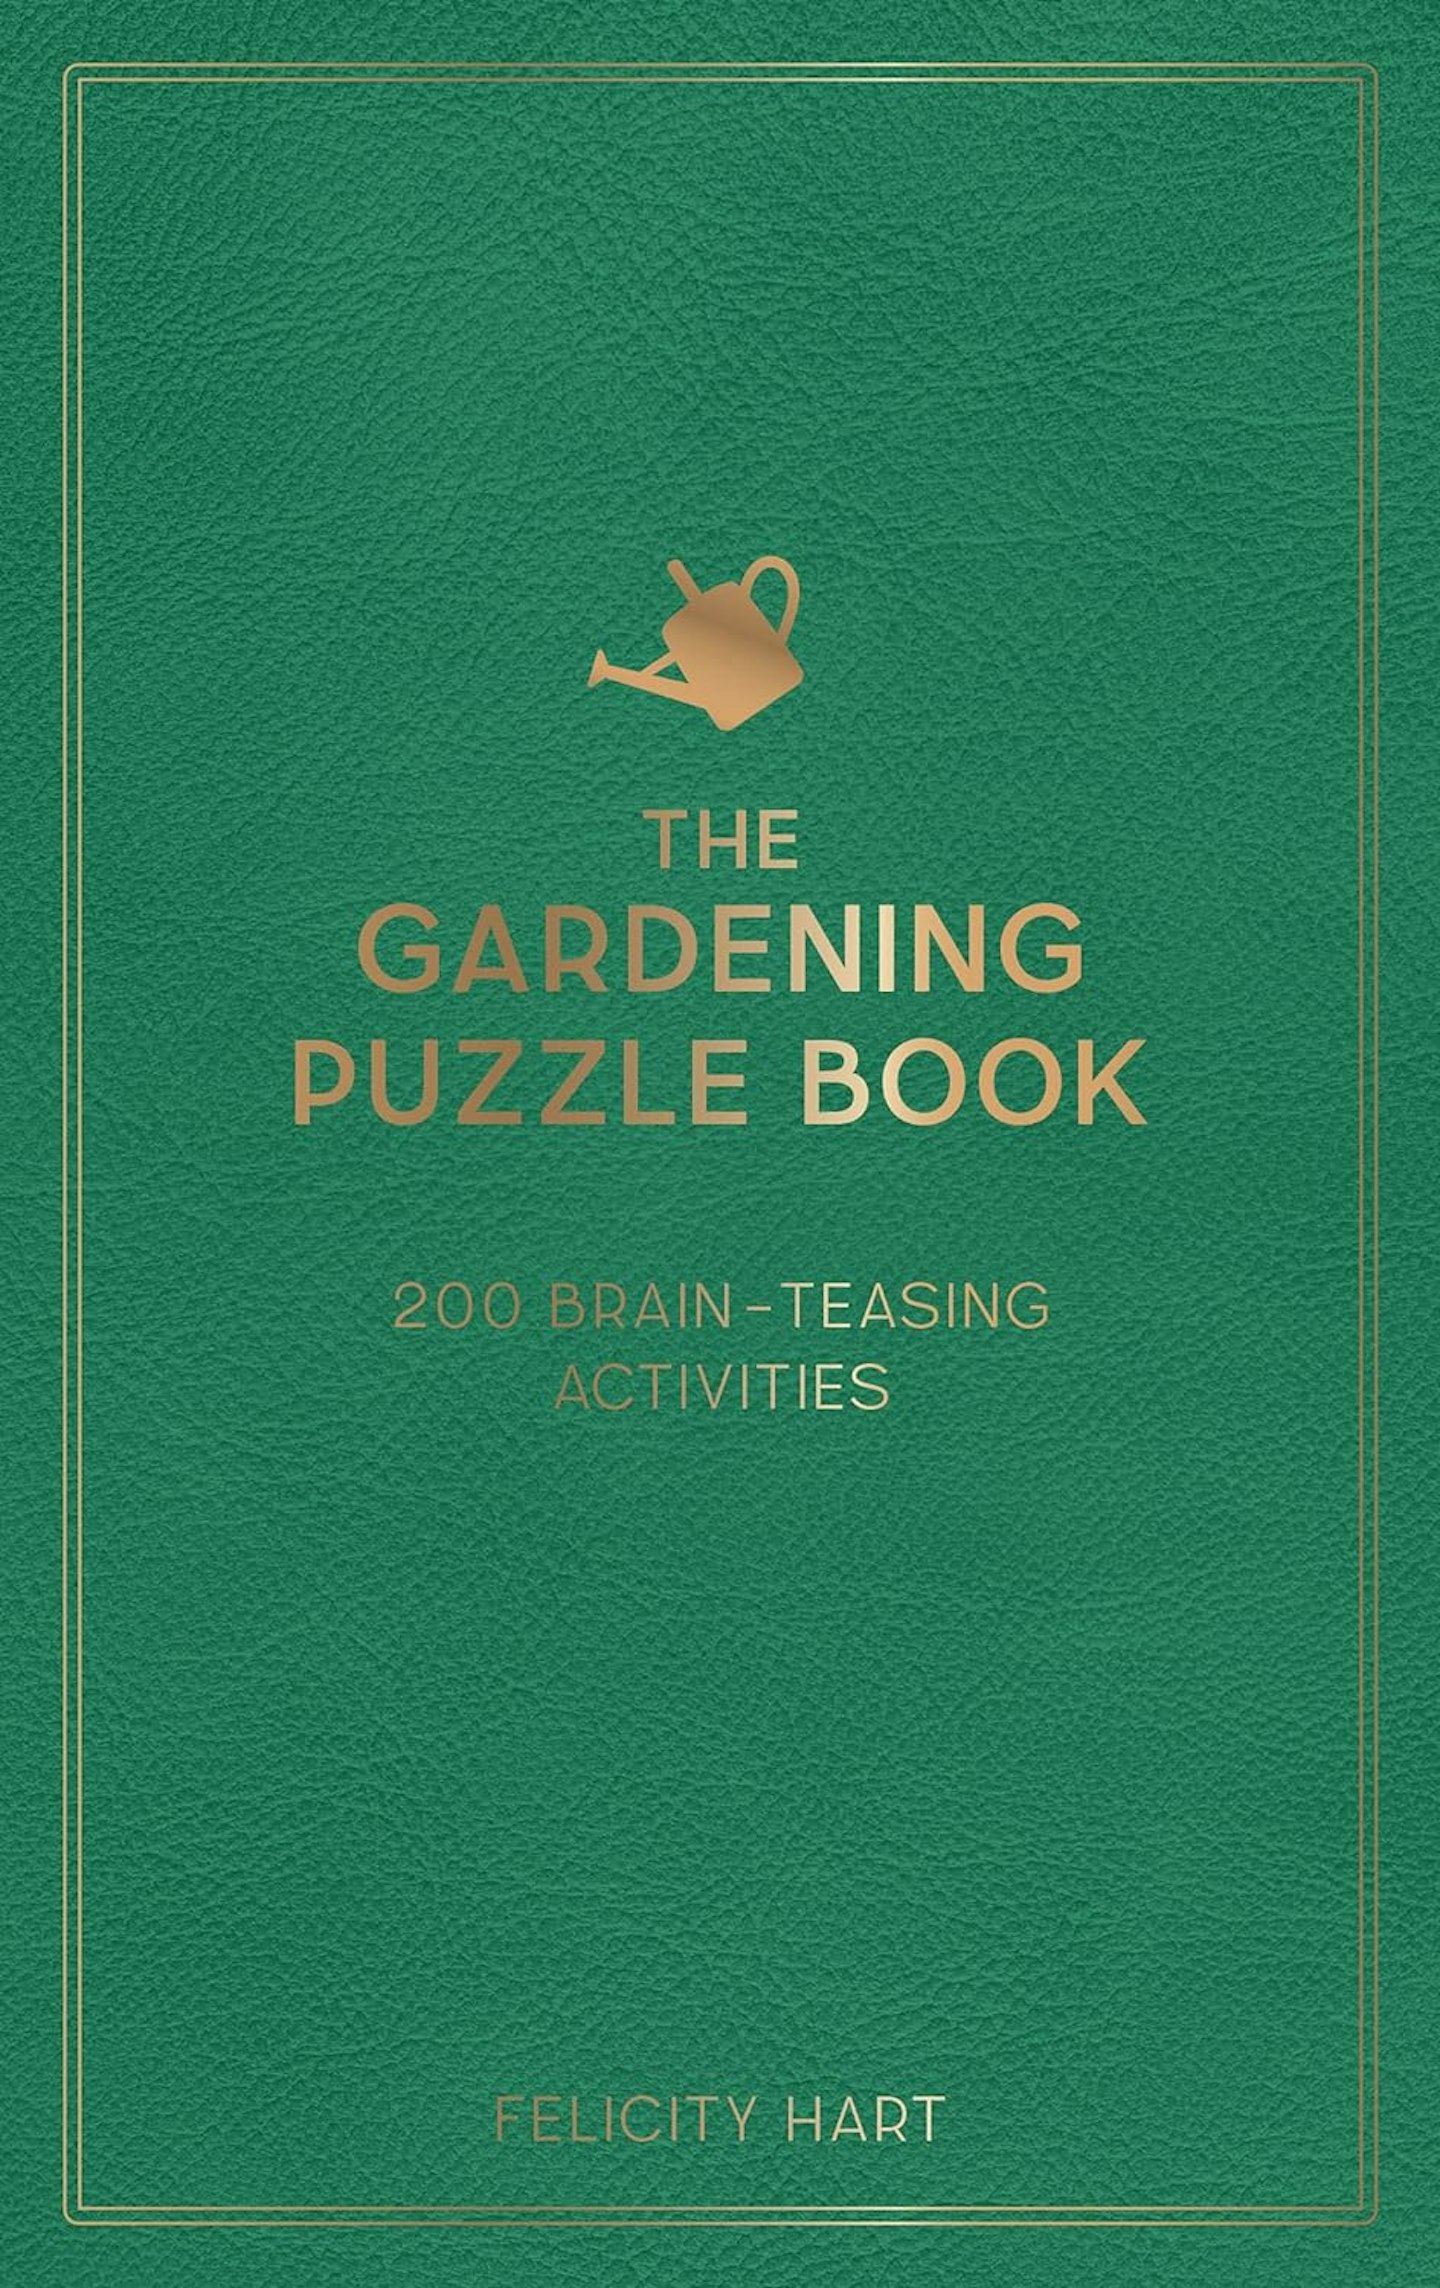 The Gardening Puzzle Book - Gifts for gardeners